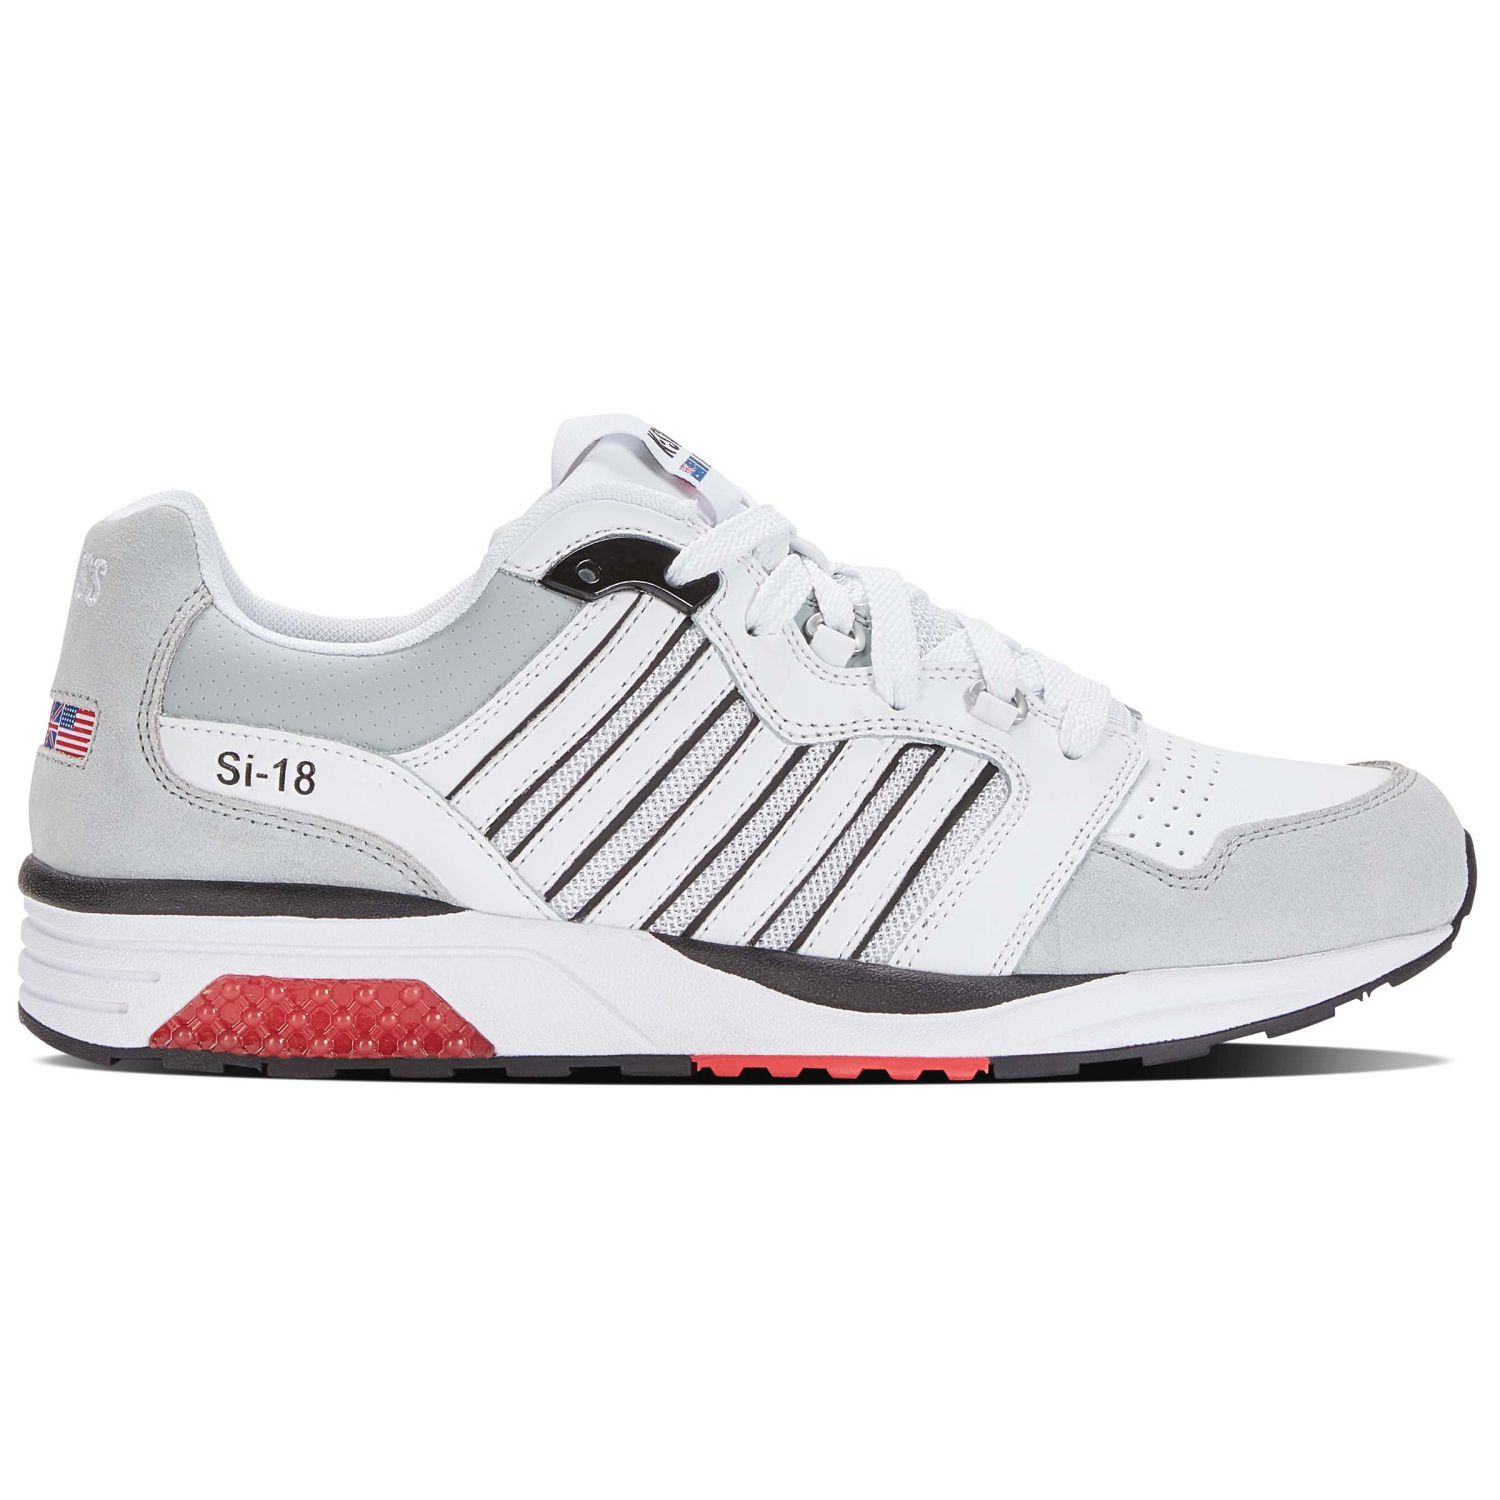 Sapatilhas K-swiss Si-18 Rannell - blanco-gris - 